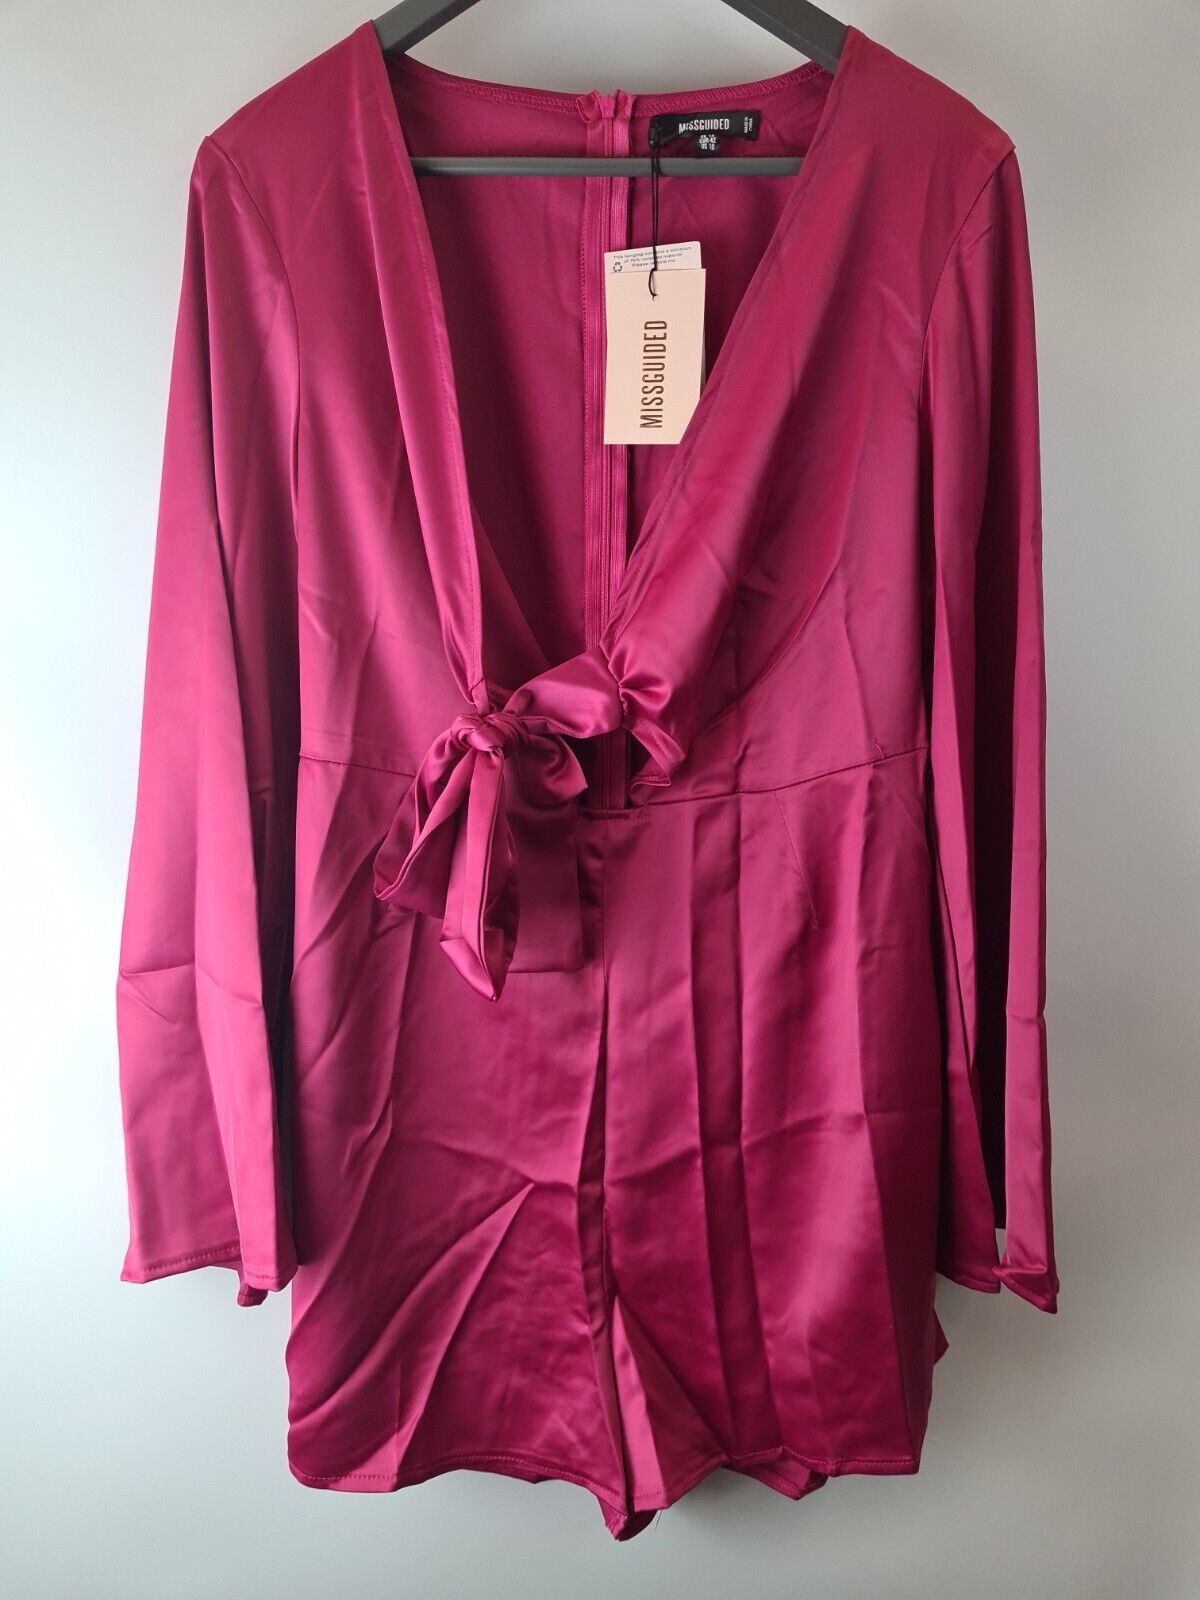 Missguided Satin Tie Front Flare Sleeves Hot Pink Playsuit Size 10 **** V348